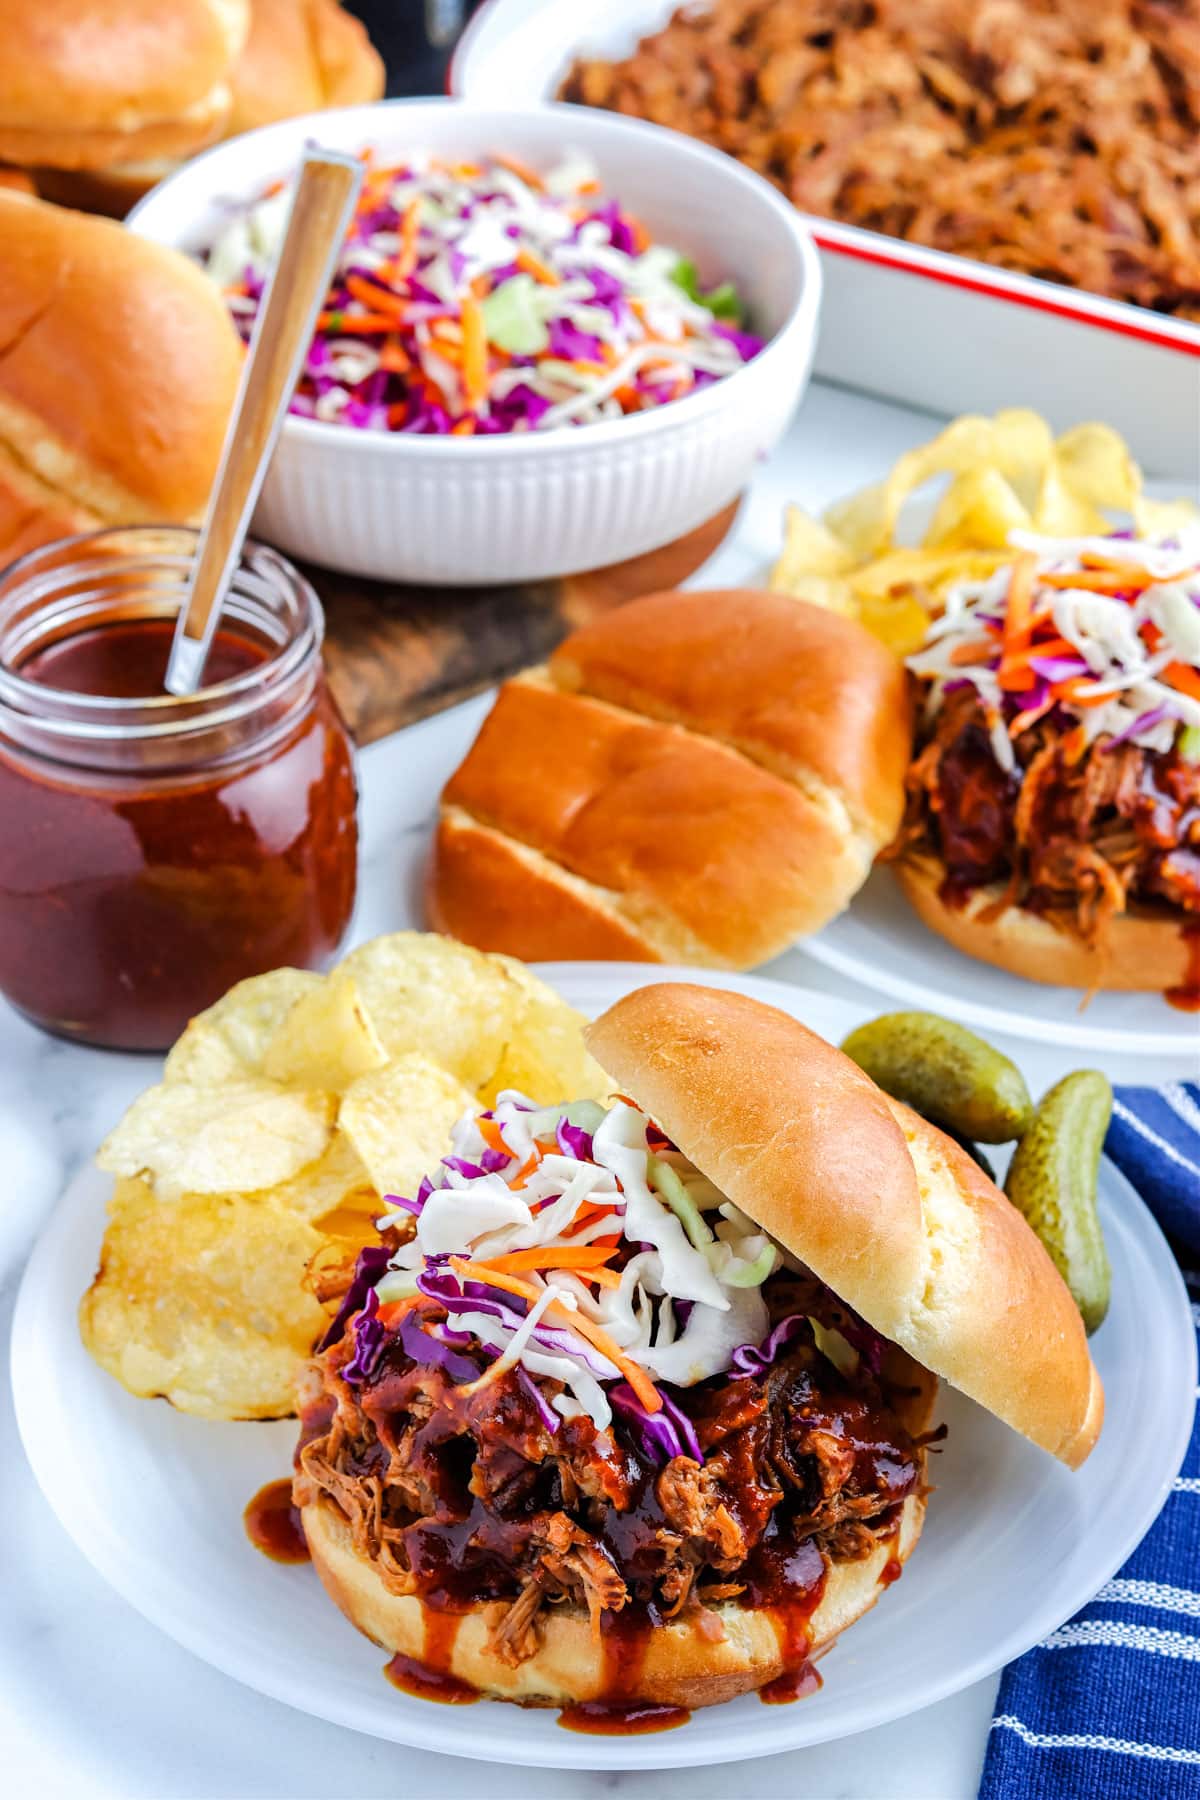 A picture of the Pulled Pork on a roll on a plate with potato chip and pickles on the side of the plate.